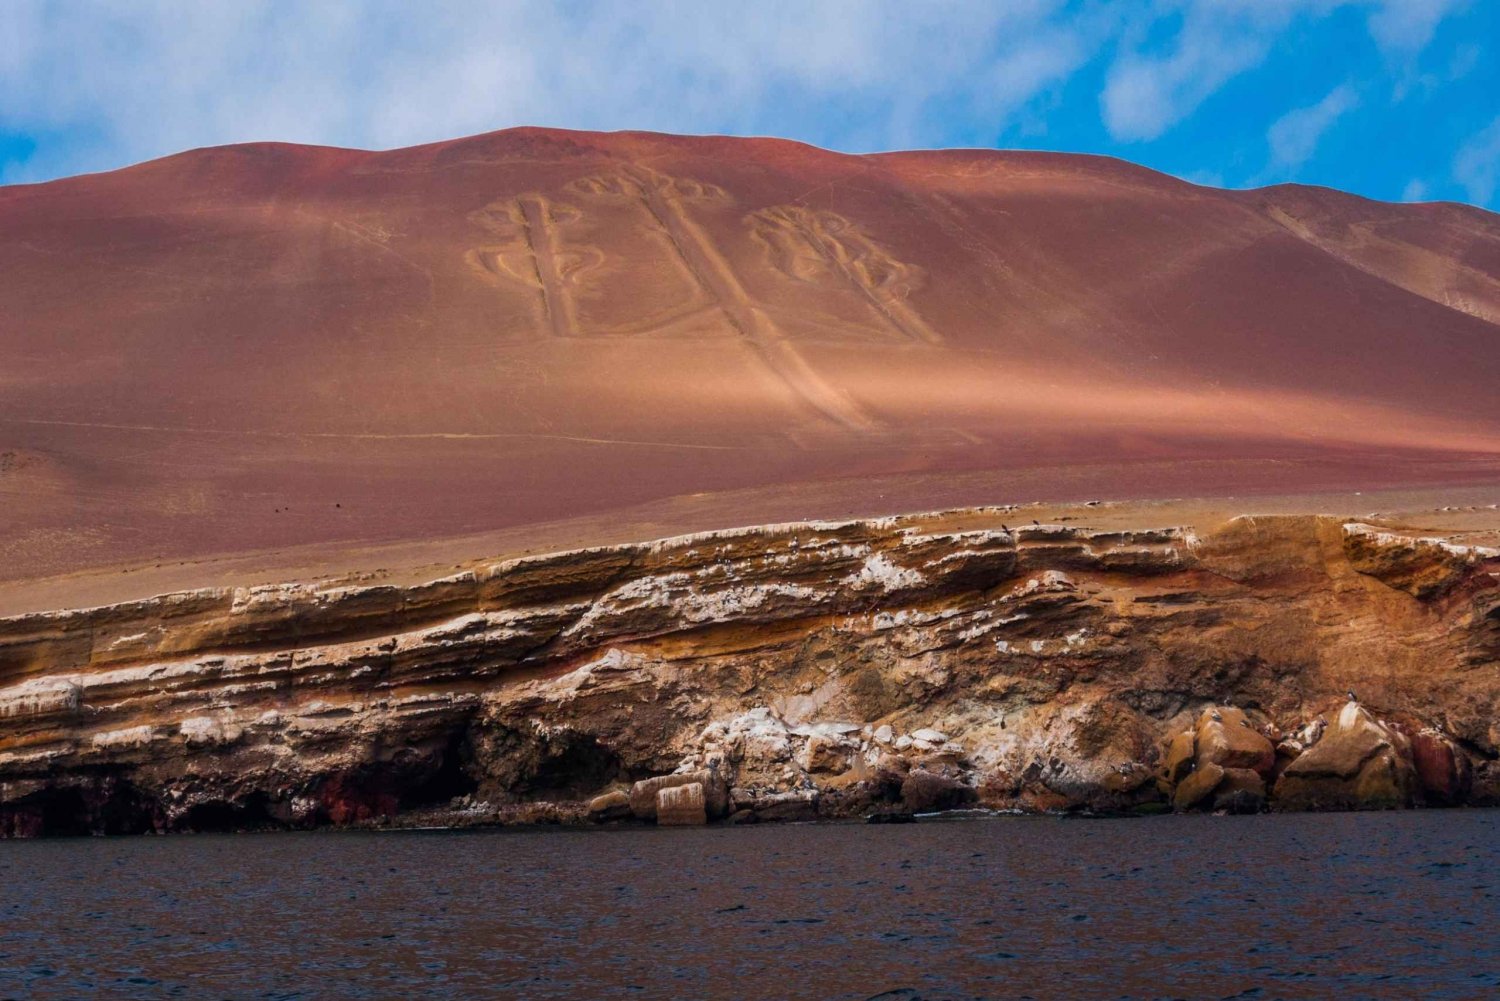 From Paracas: Scenic Boat Tour to Ballestas Island